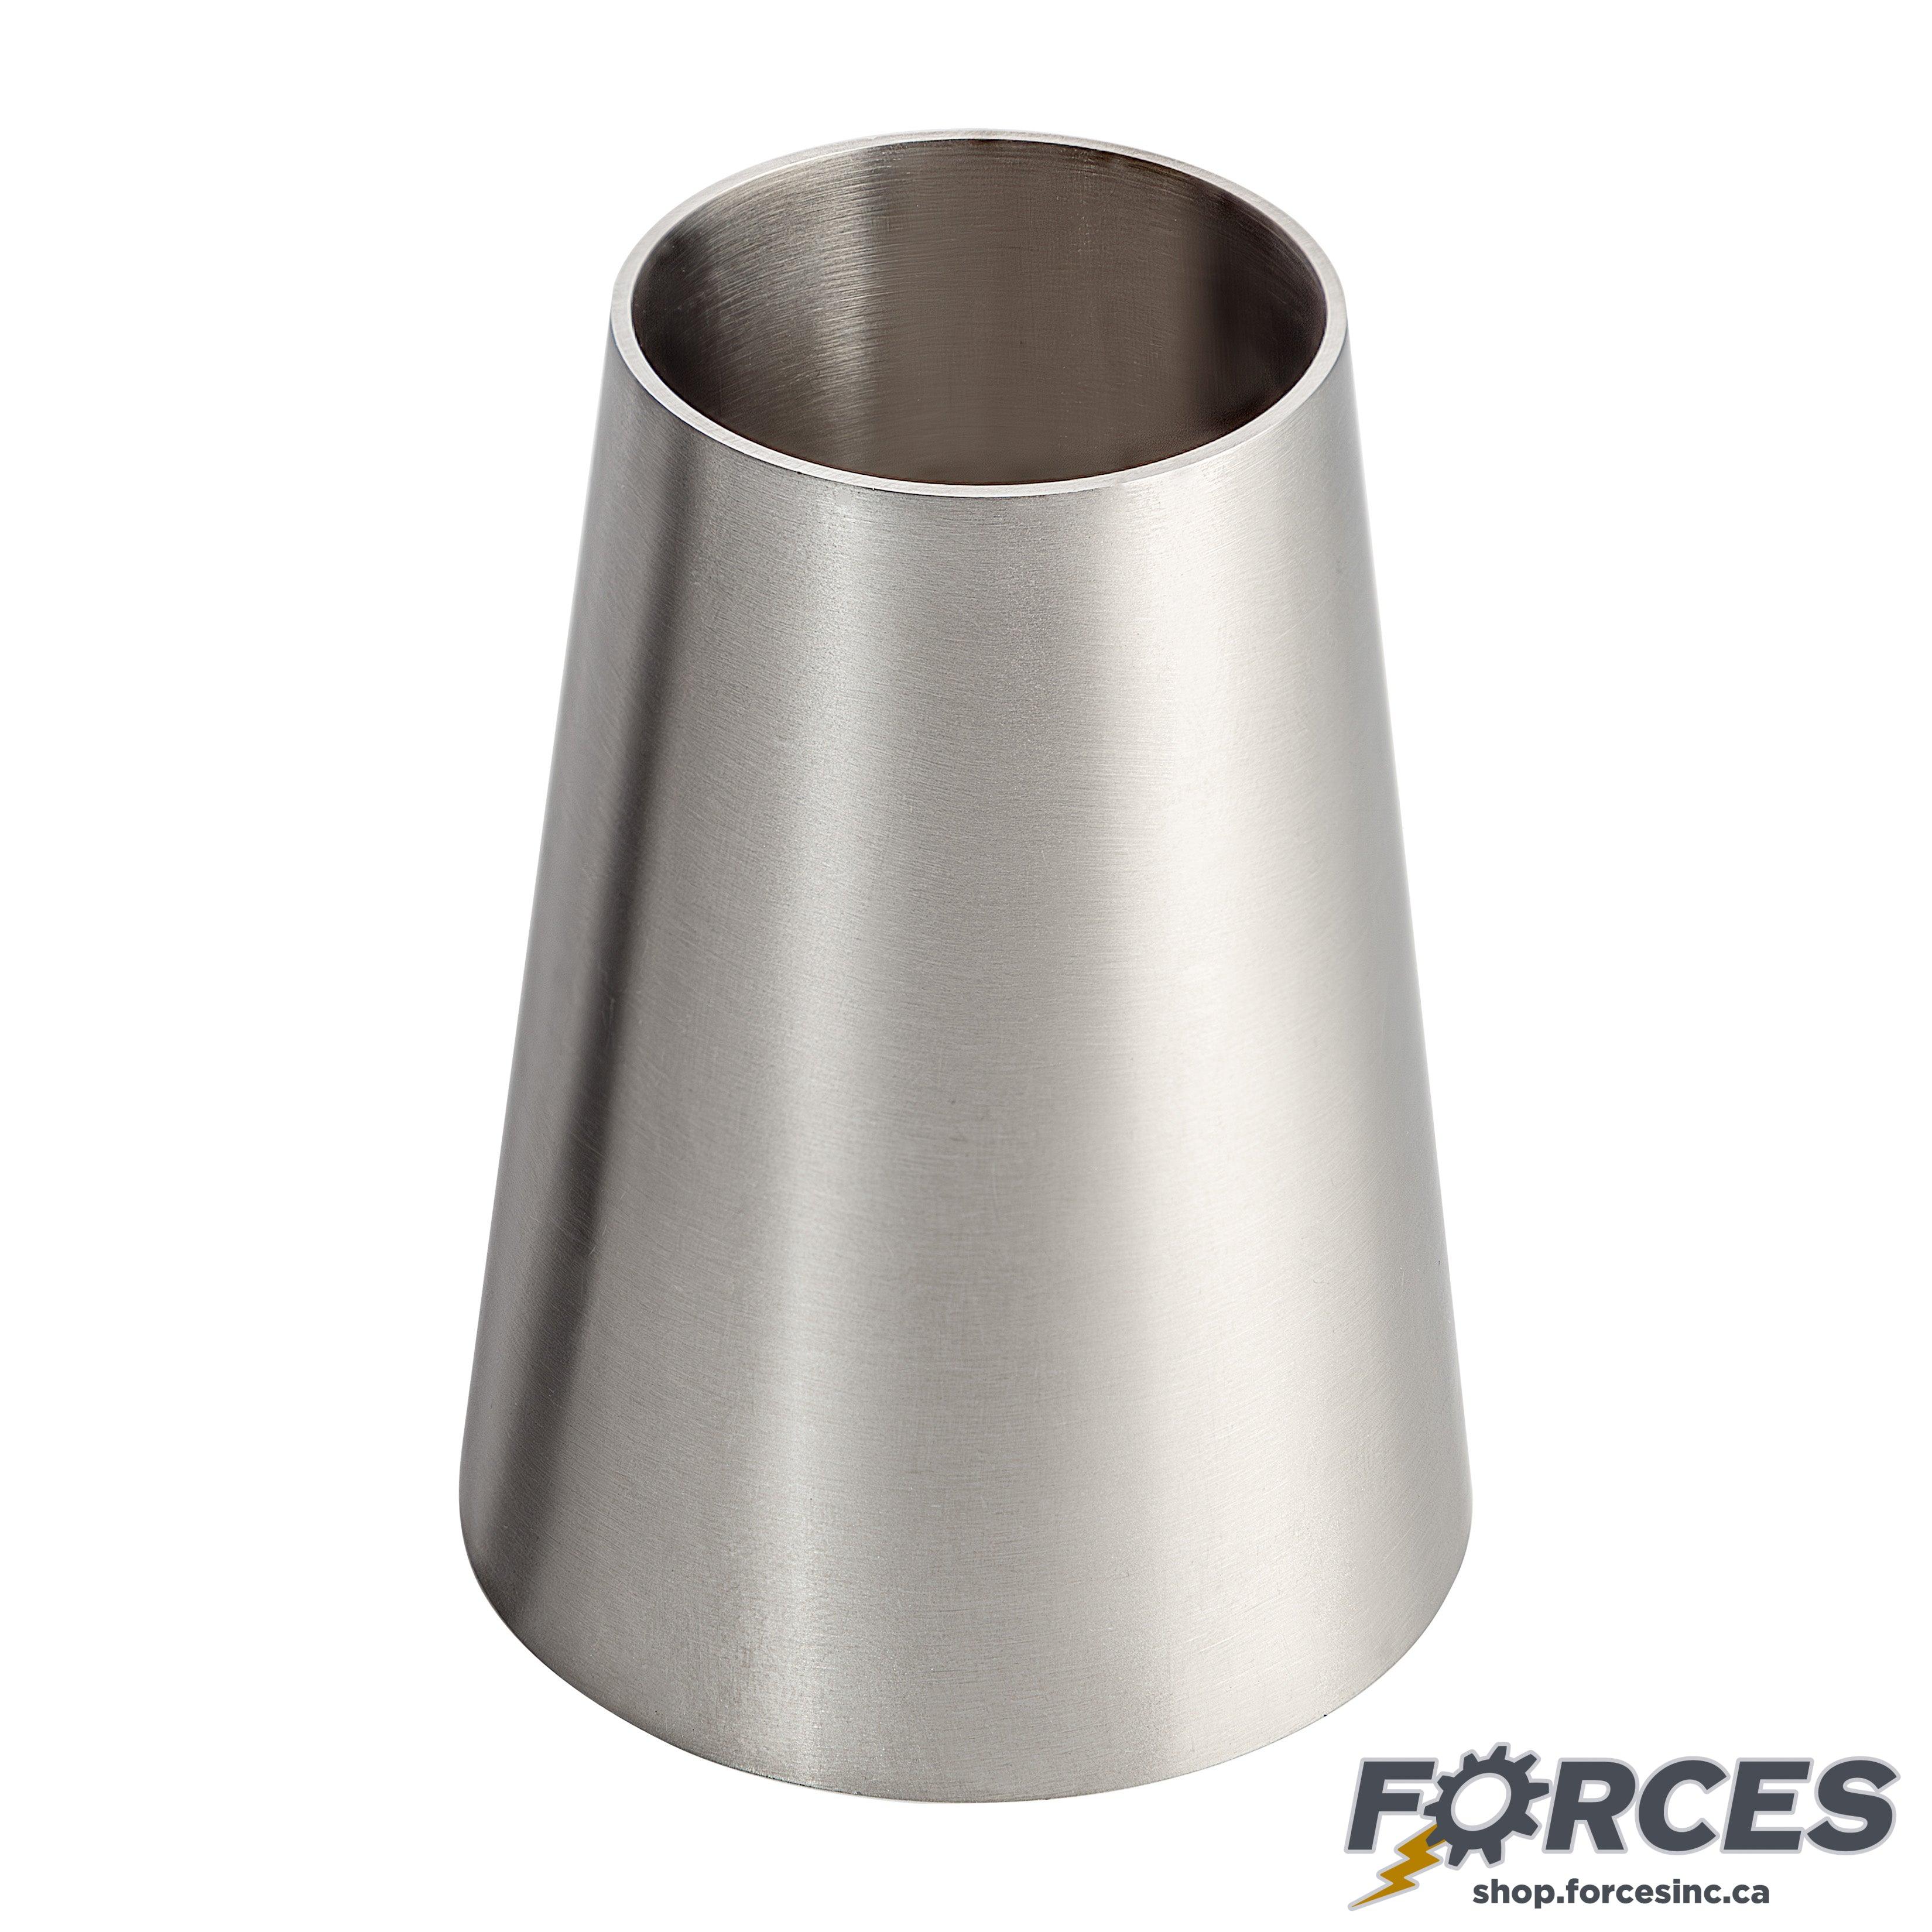 2" x 3/4" Butt Weld Concentric Reducer - Stainless Steel 316 - Forces Inc